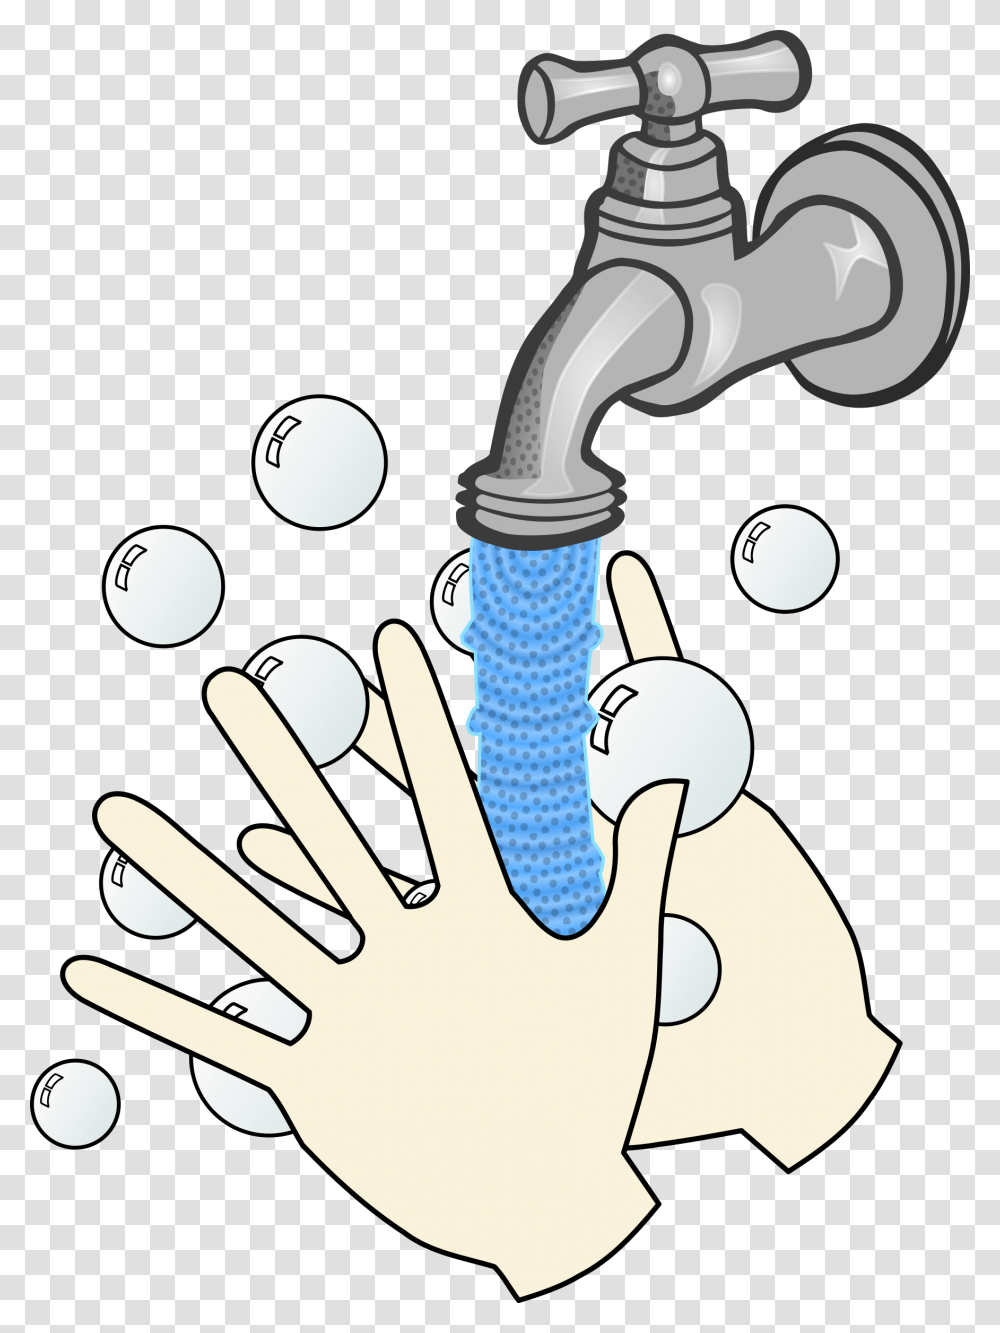 Running Water Wash Your Hands With Soap And Water, Sink Faucet, Indoors, Washing, Plumbing Transparent Png